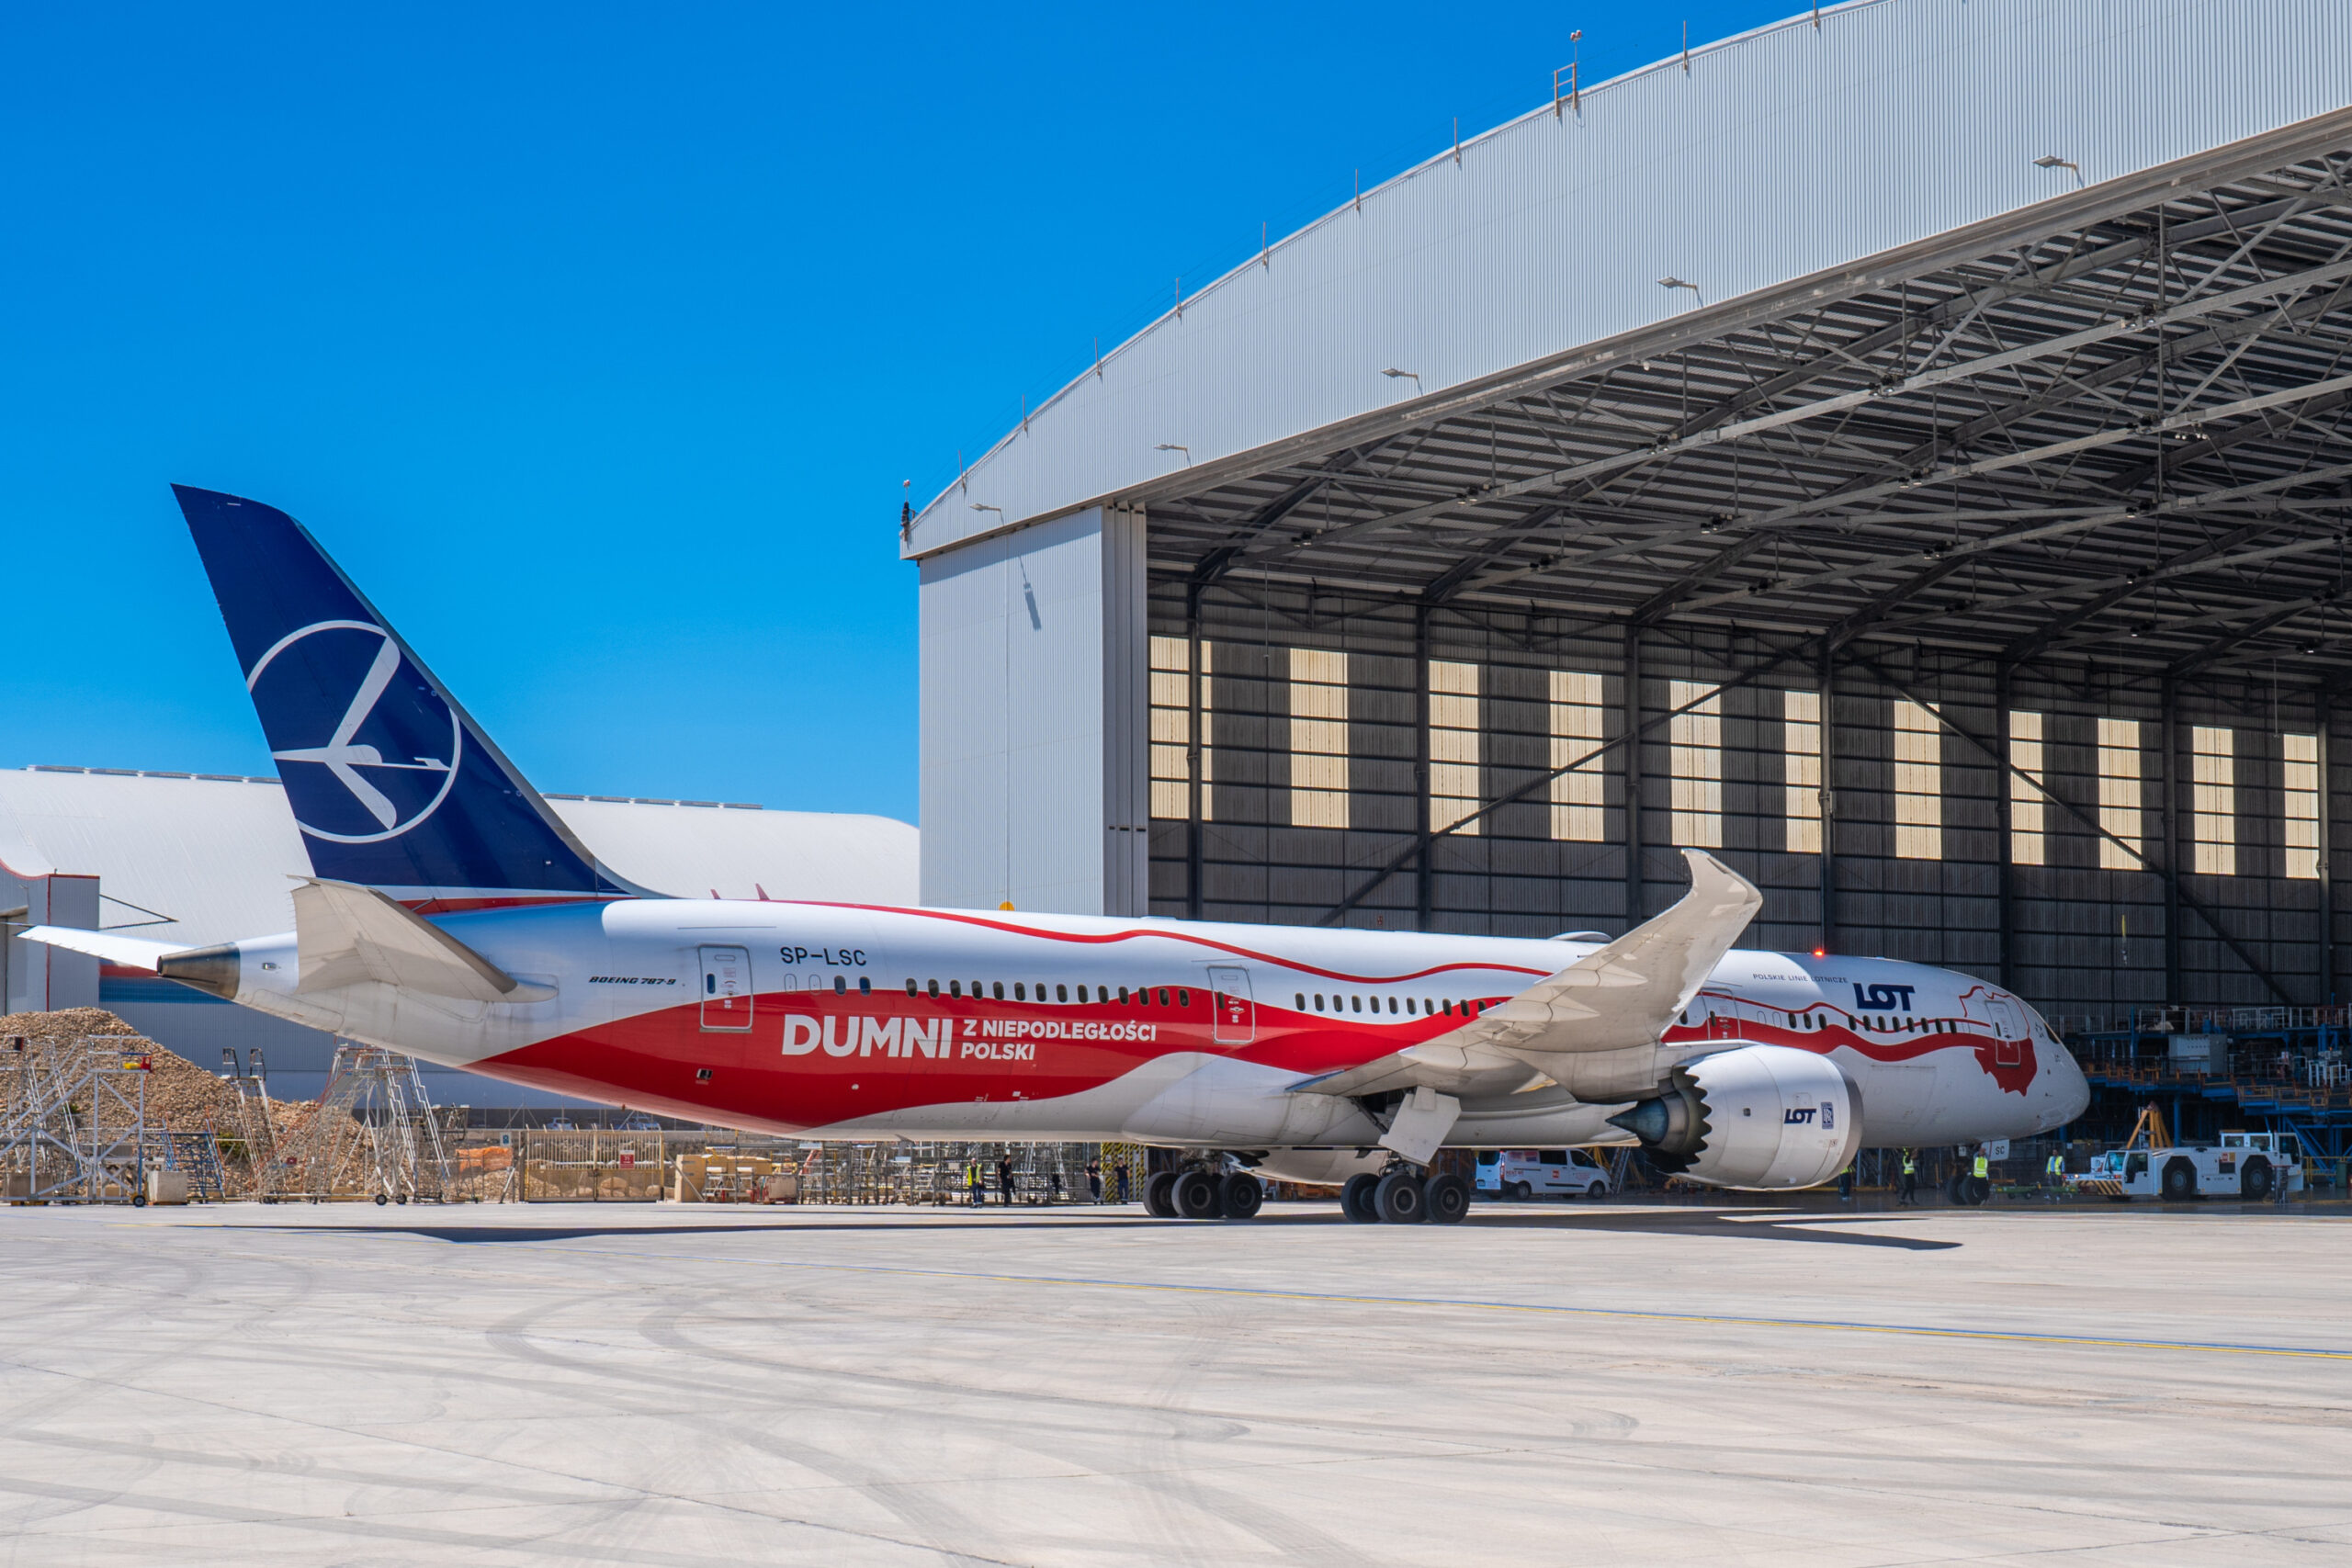 LTM has completed its first base maintenance on a Boeing 787 Dreamliner © LTM